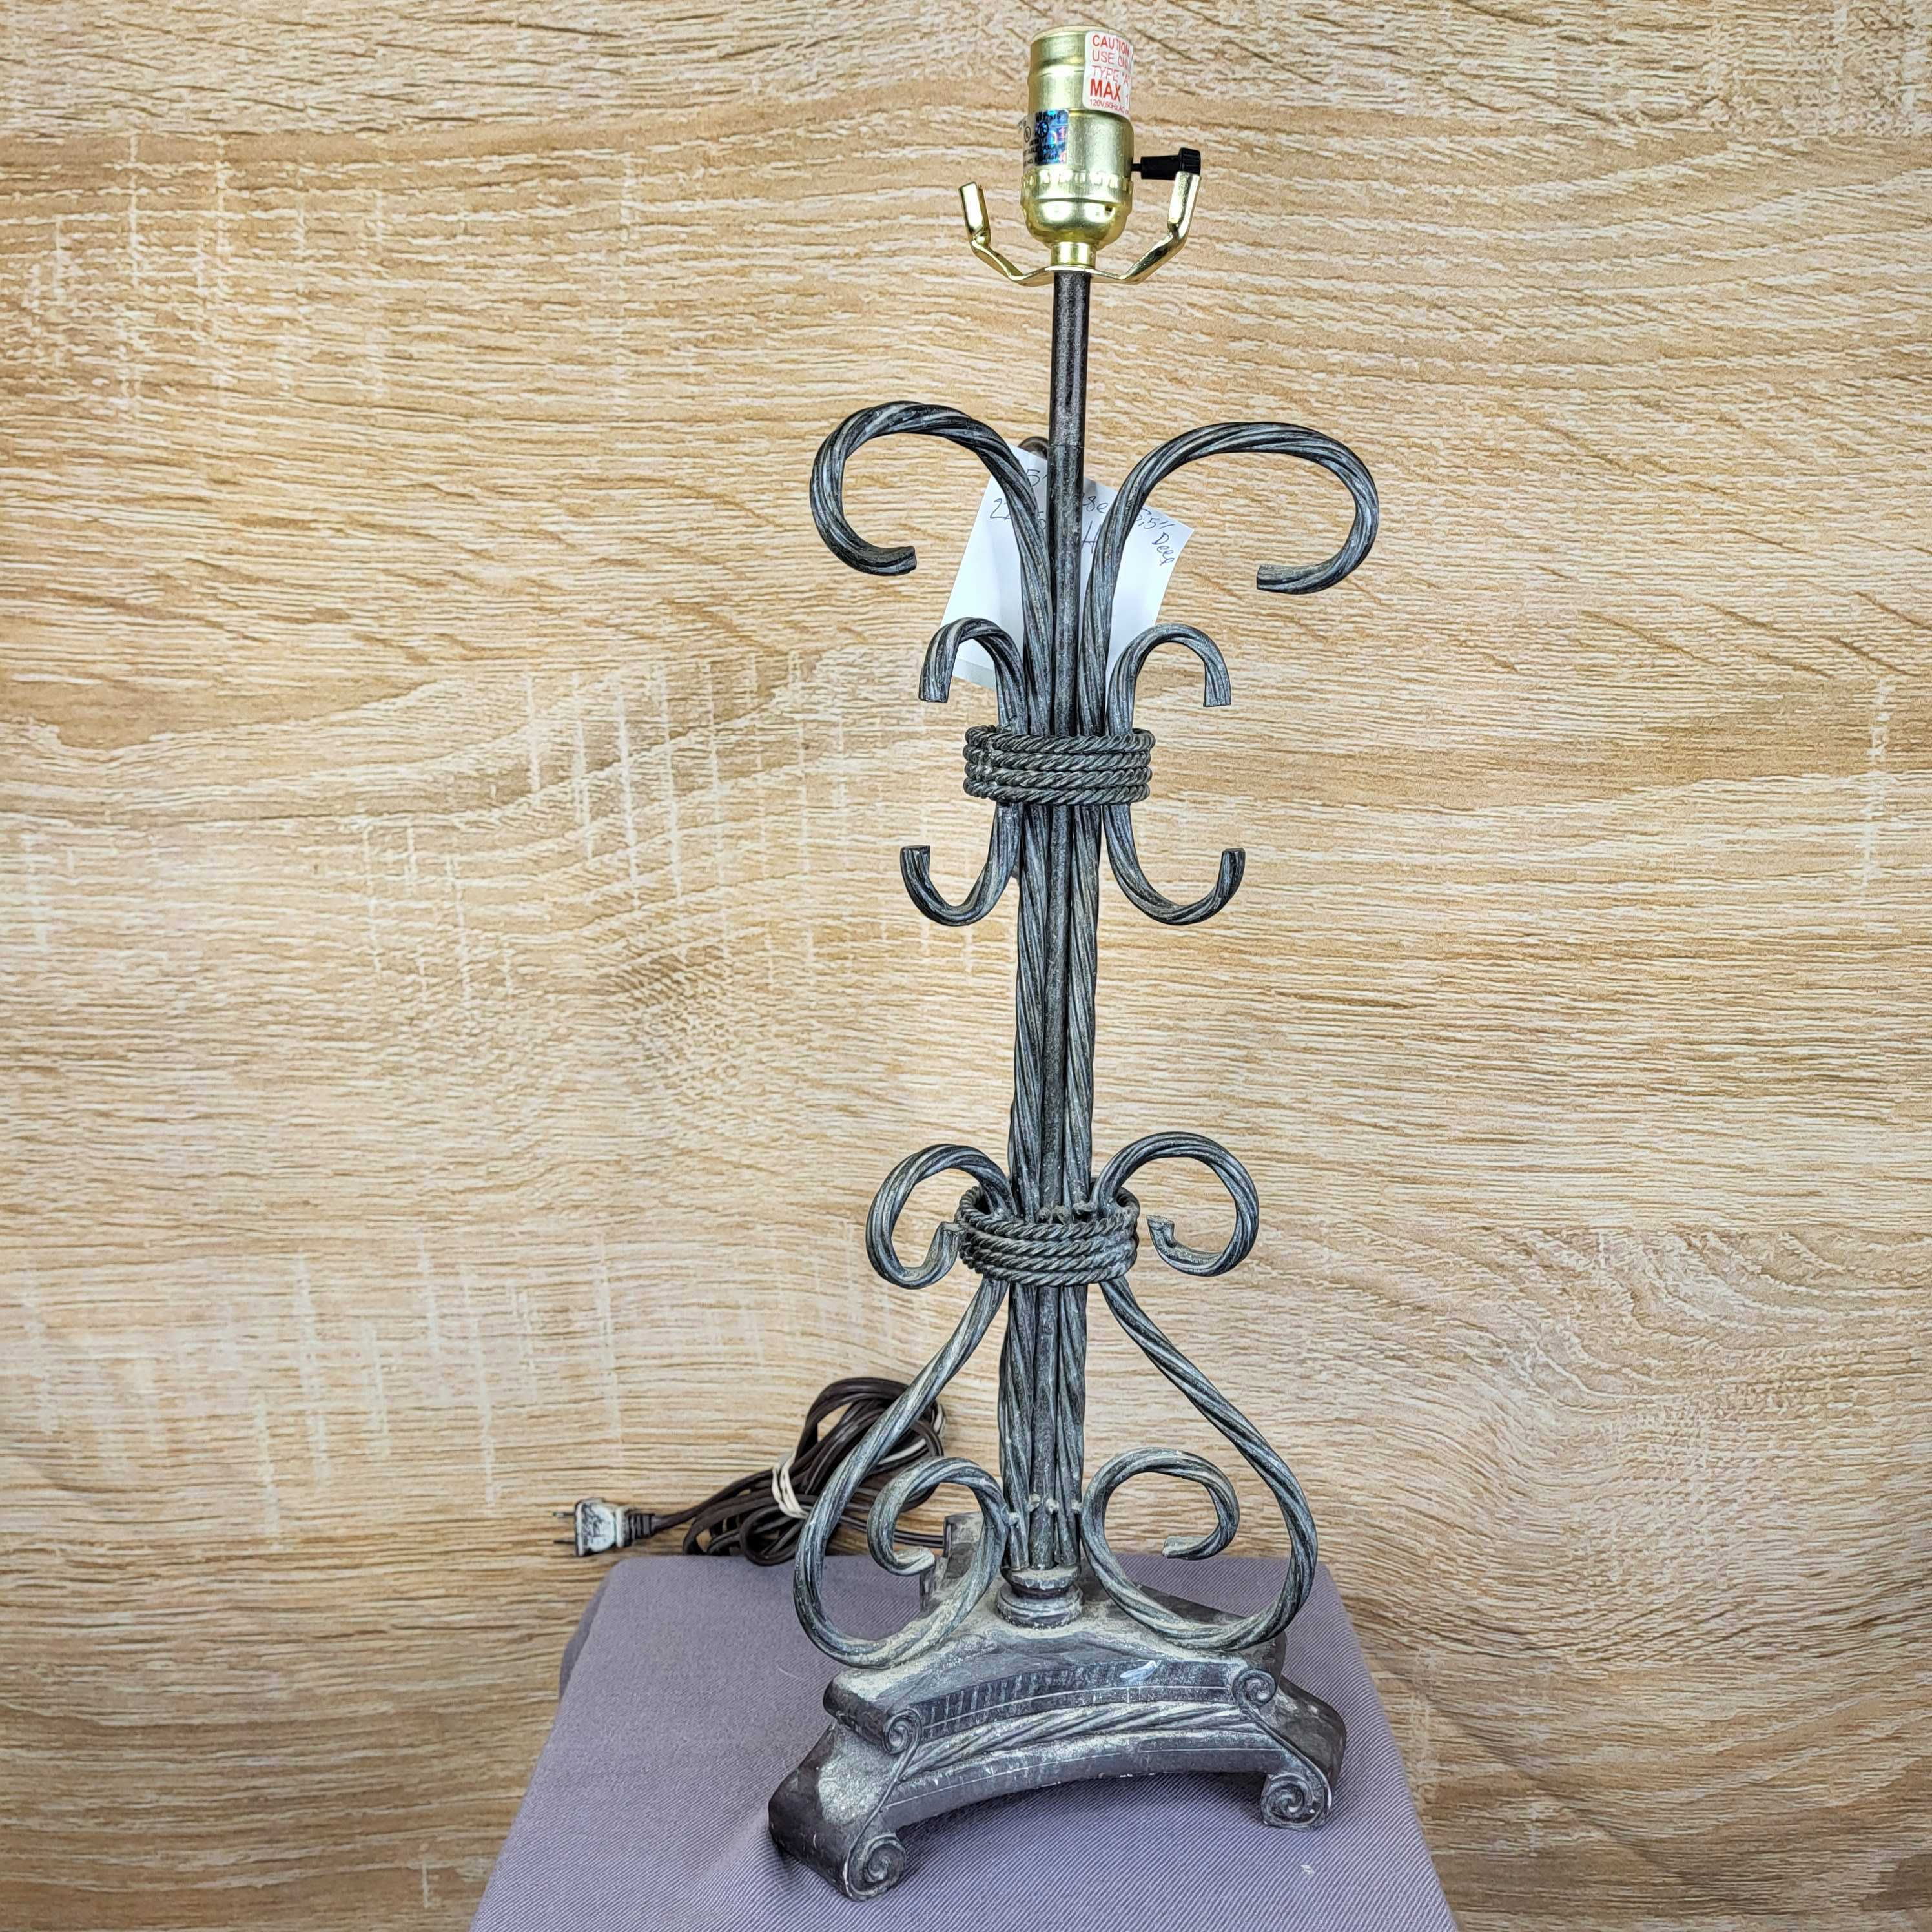 Wrought Iron Curved with Knot Embellishments Table Lamp